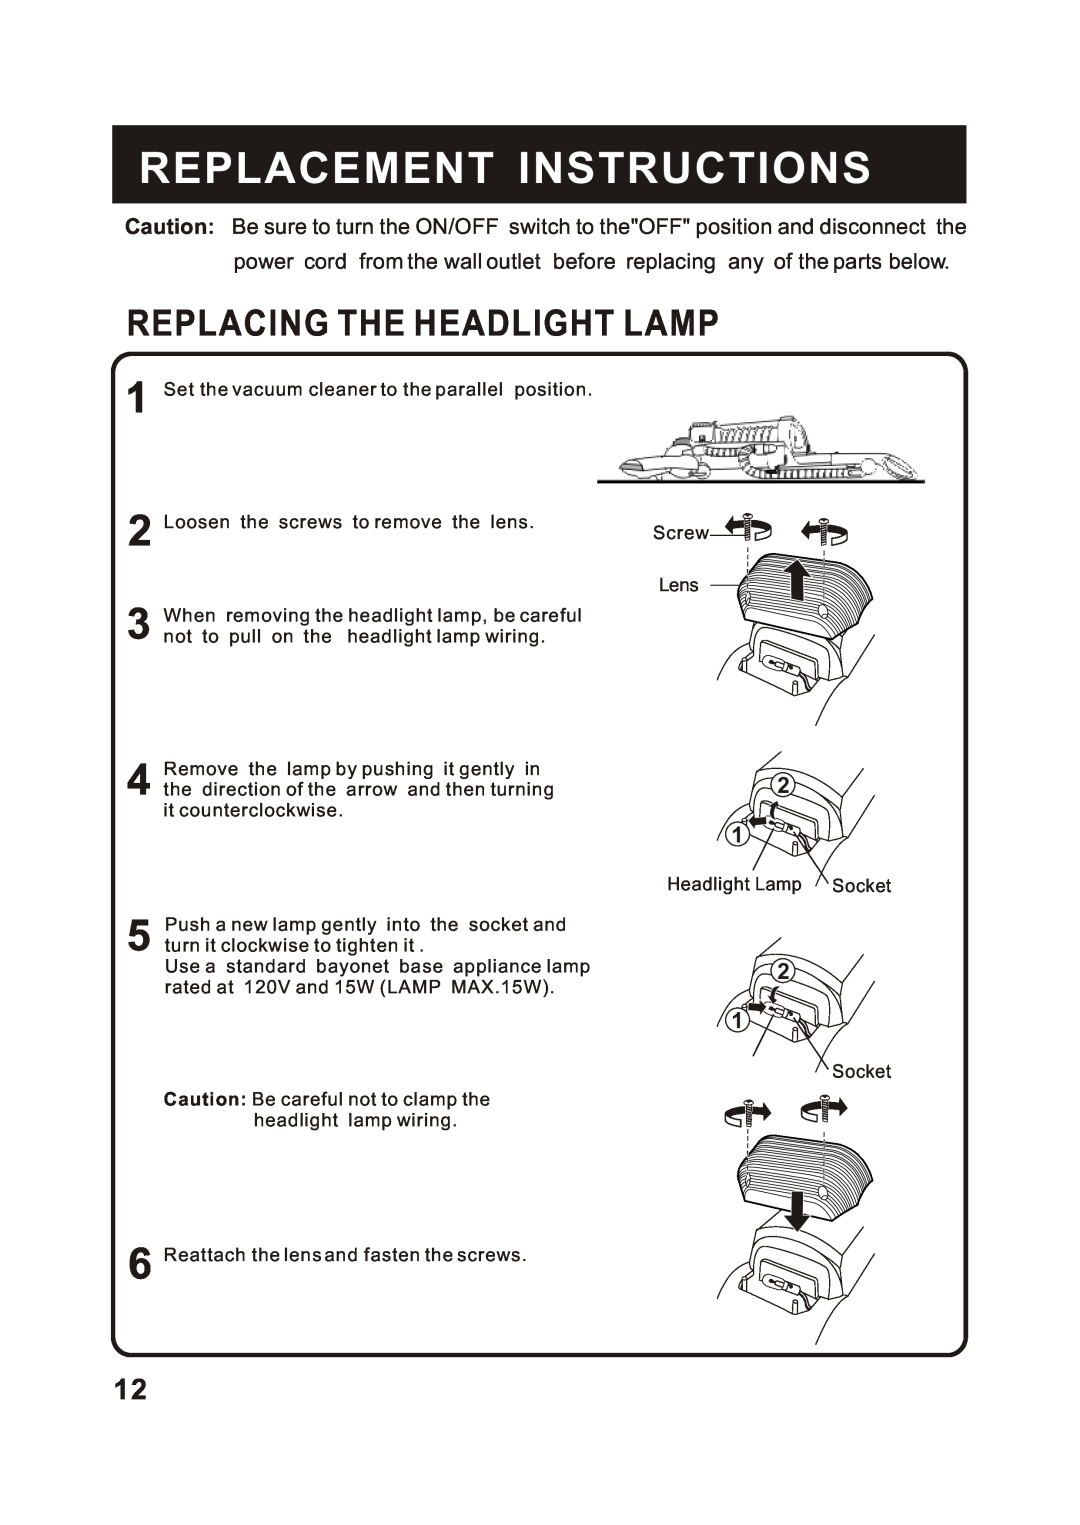 Fantom Vacuum FM743H instruction manual Replacement Instructions, Replacing The Headlight Lamp 